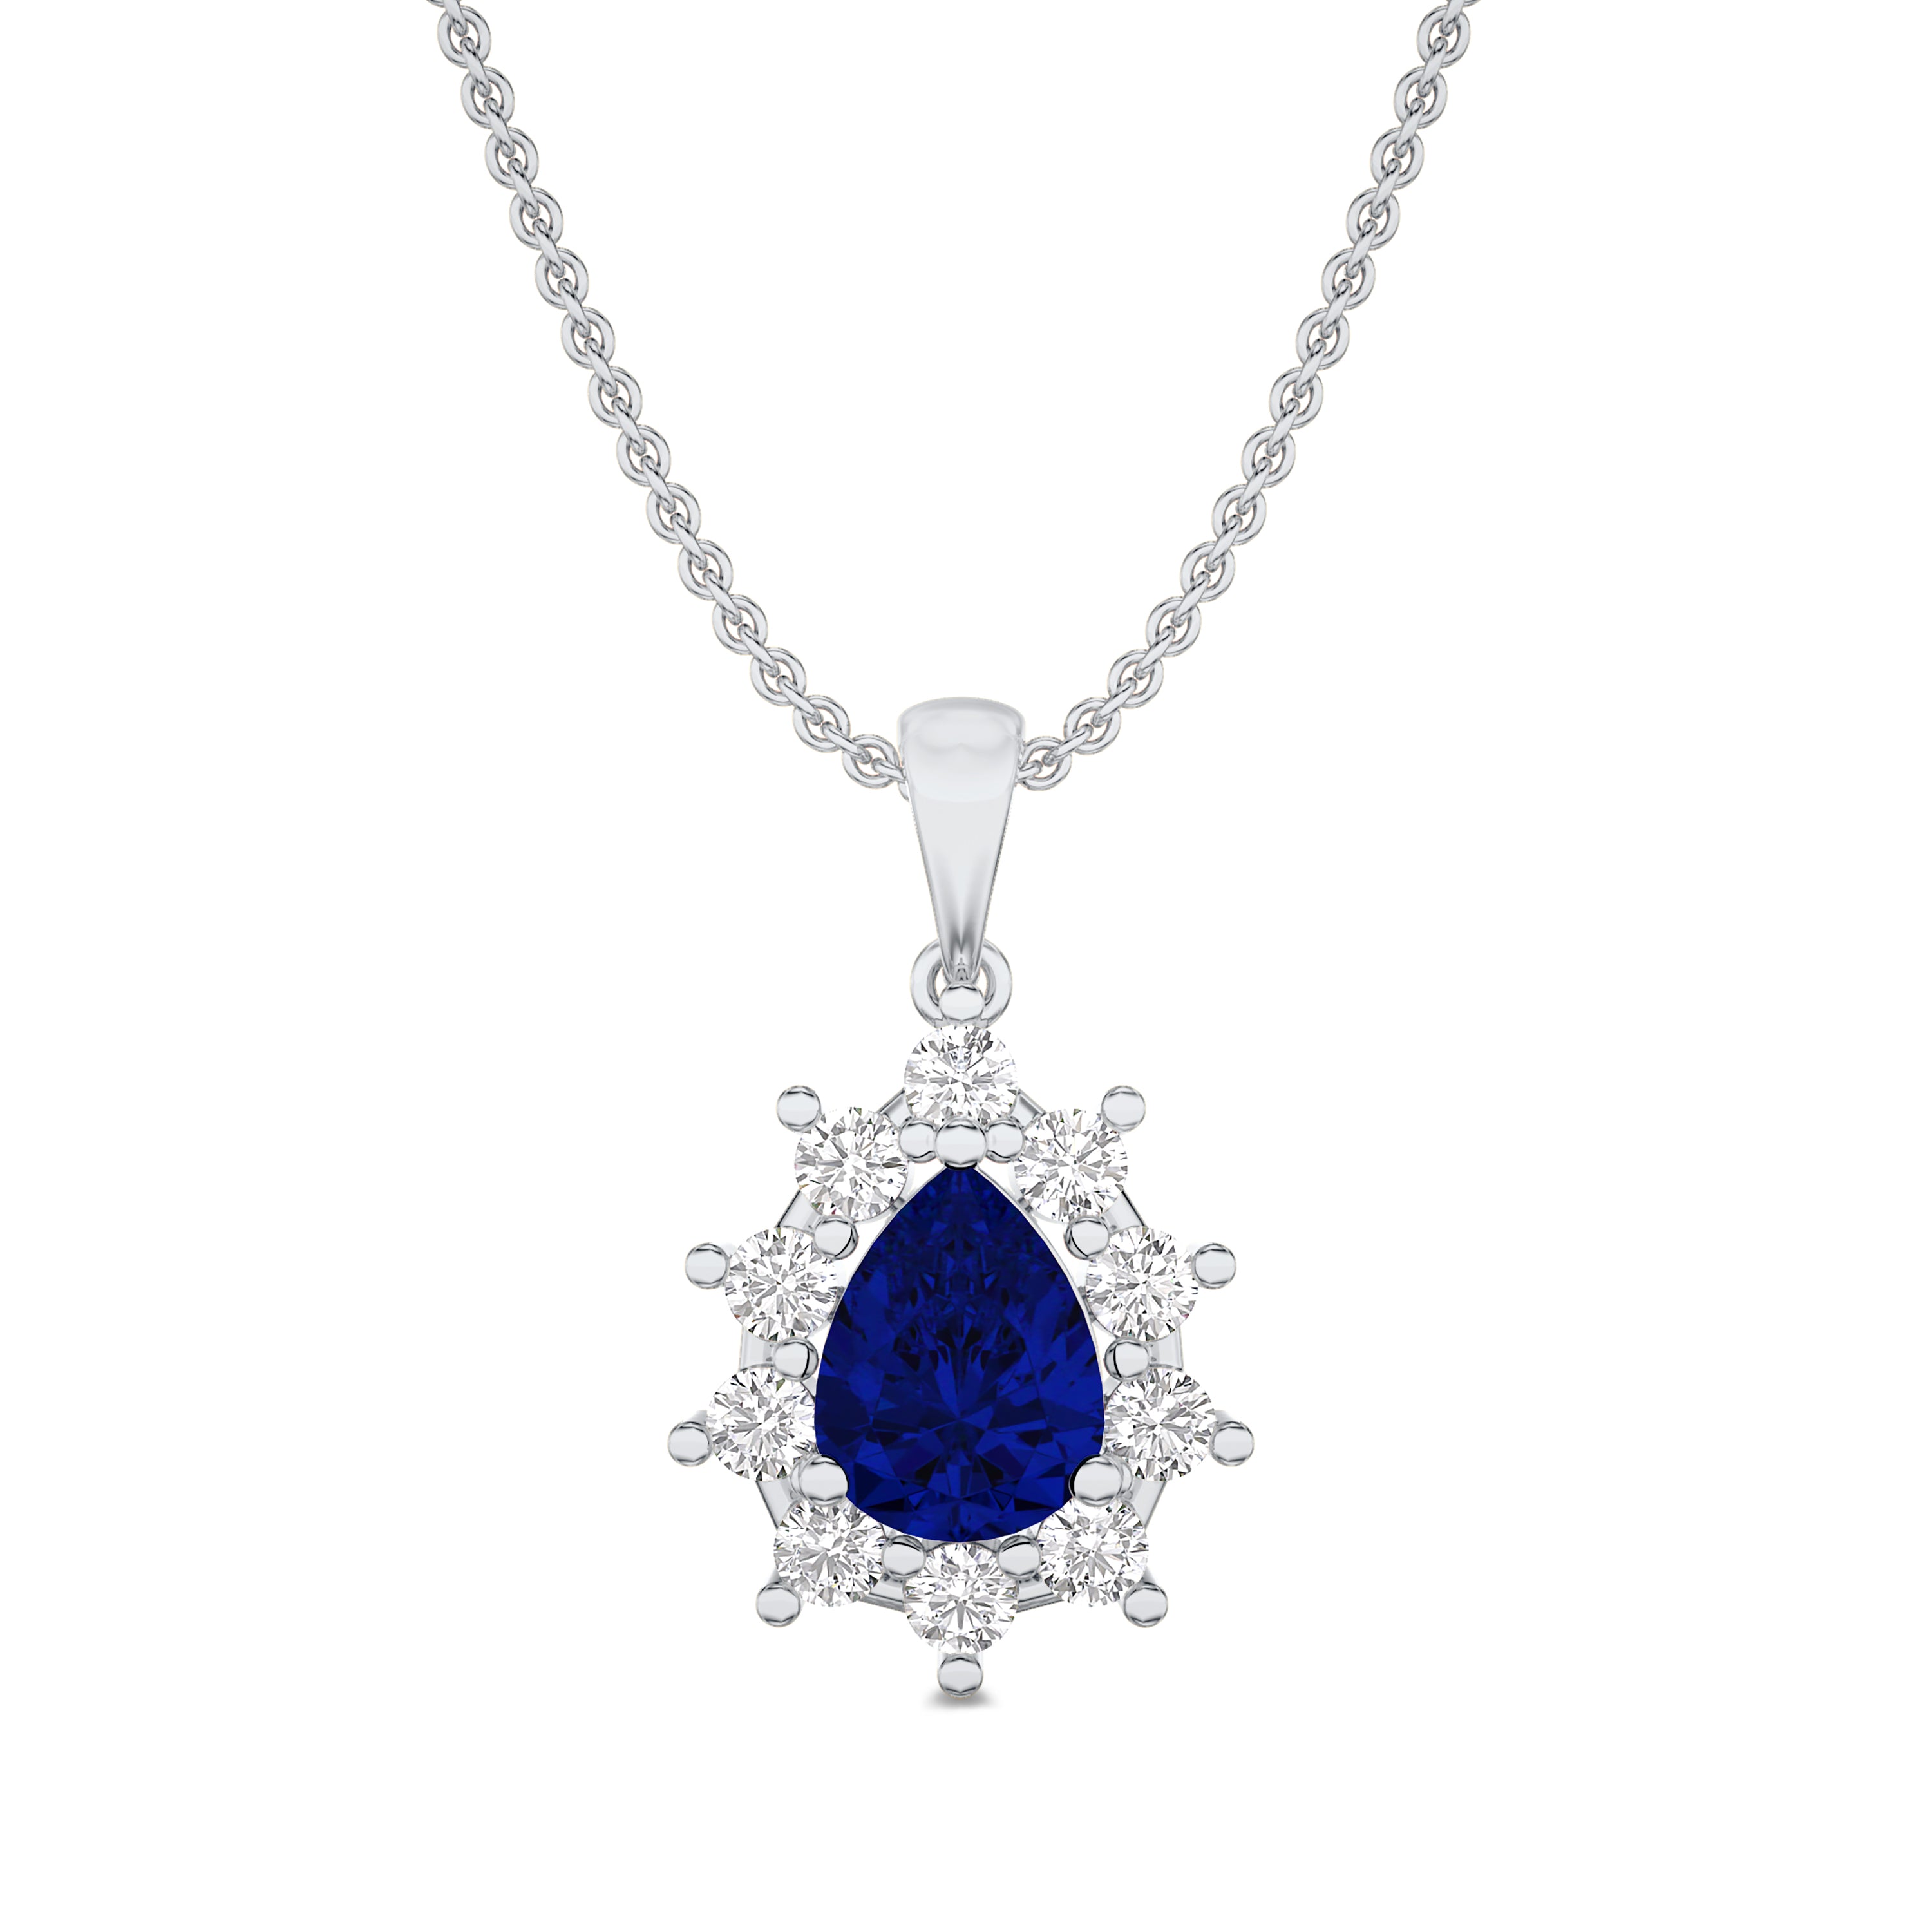 diamond and pear shaped sapphire necklace in 18K white gold, FG color, SI clarity, diamonds in 0.43 carats, sapphire in 0.90 carats